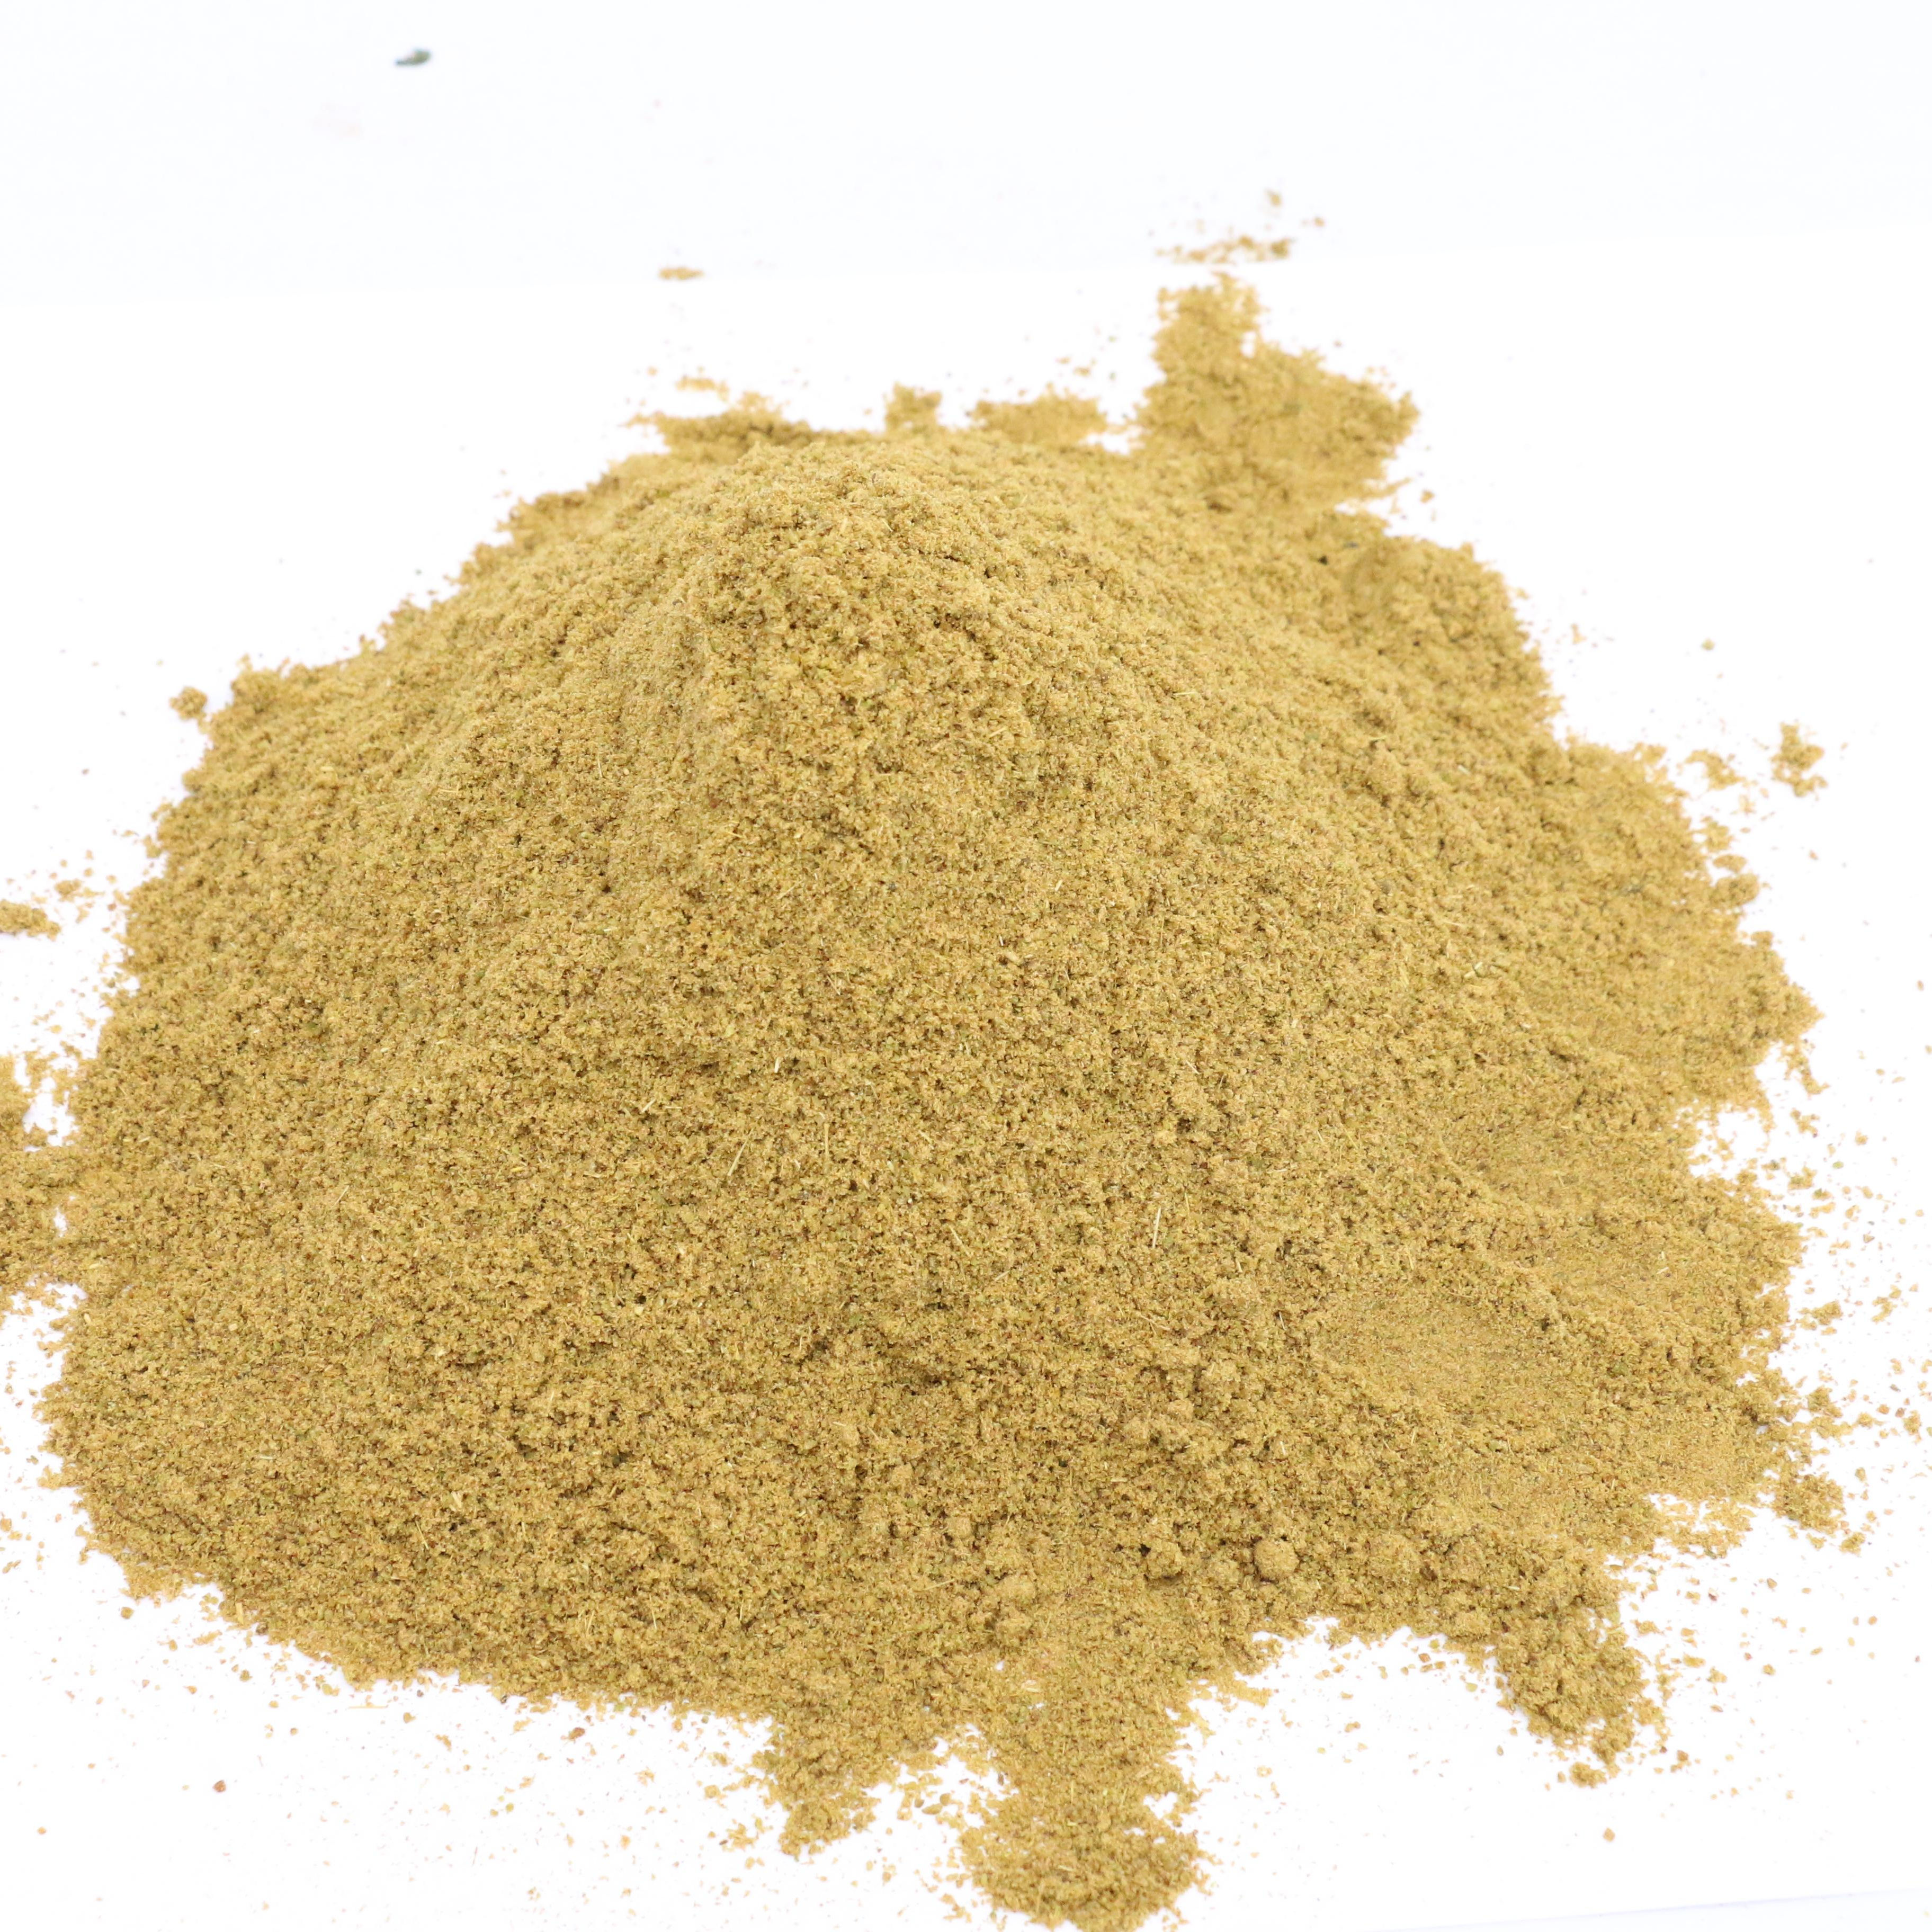 Mutton Masala Powder from Aapoorva spices & herbs